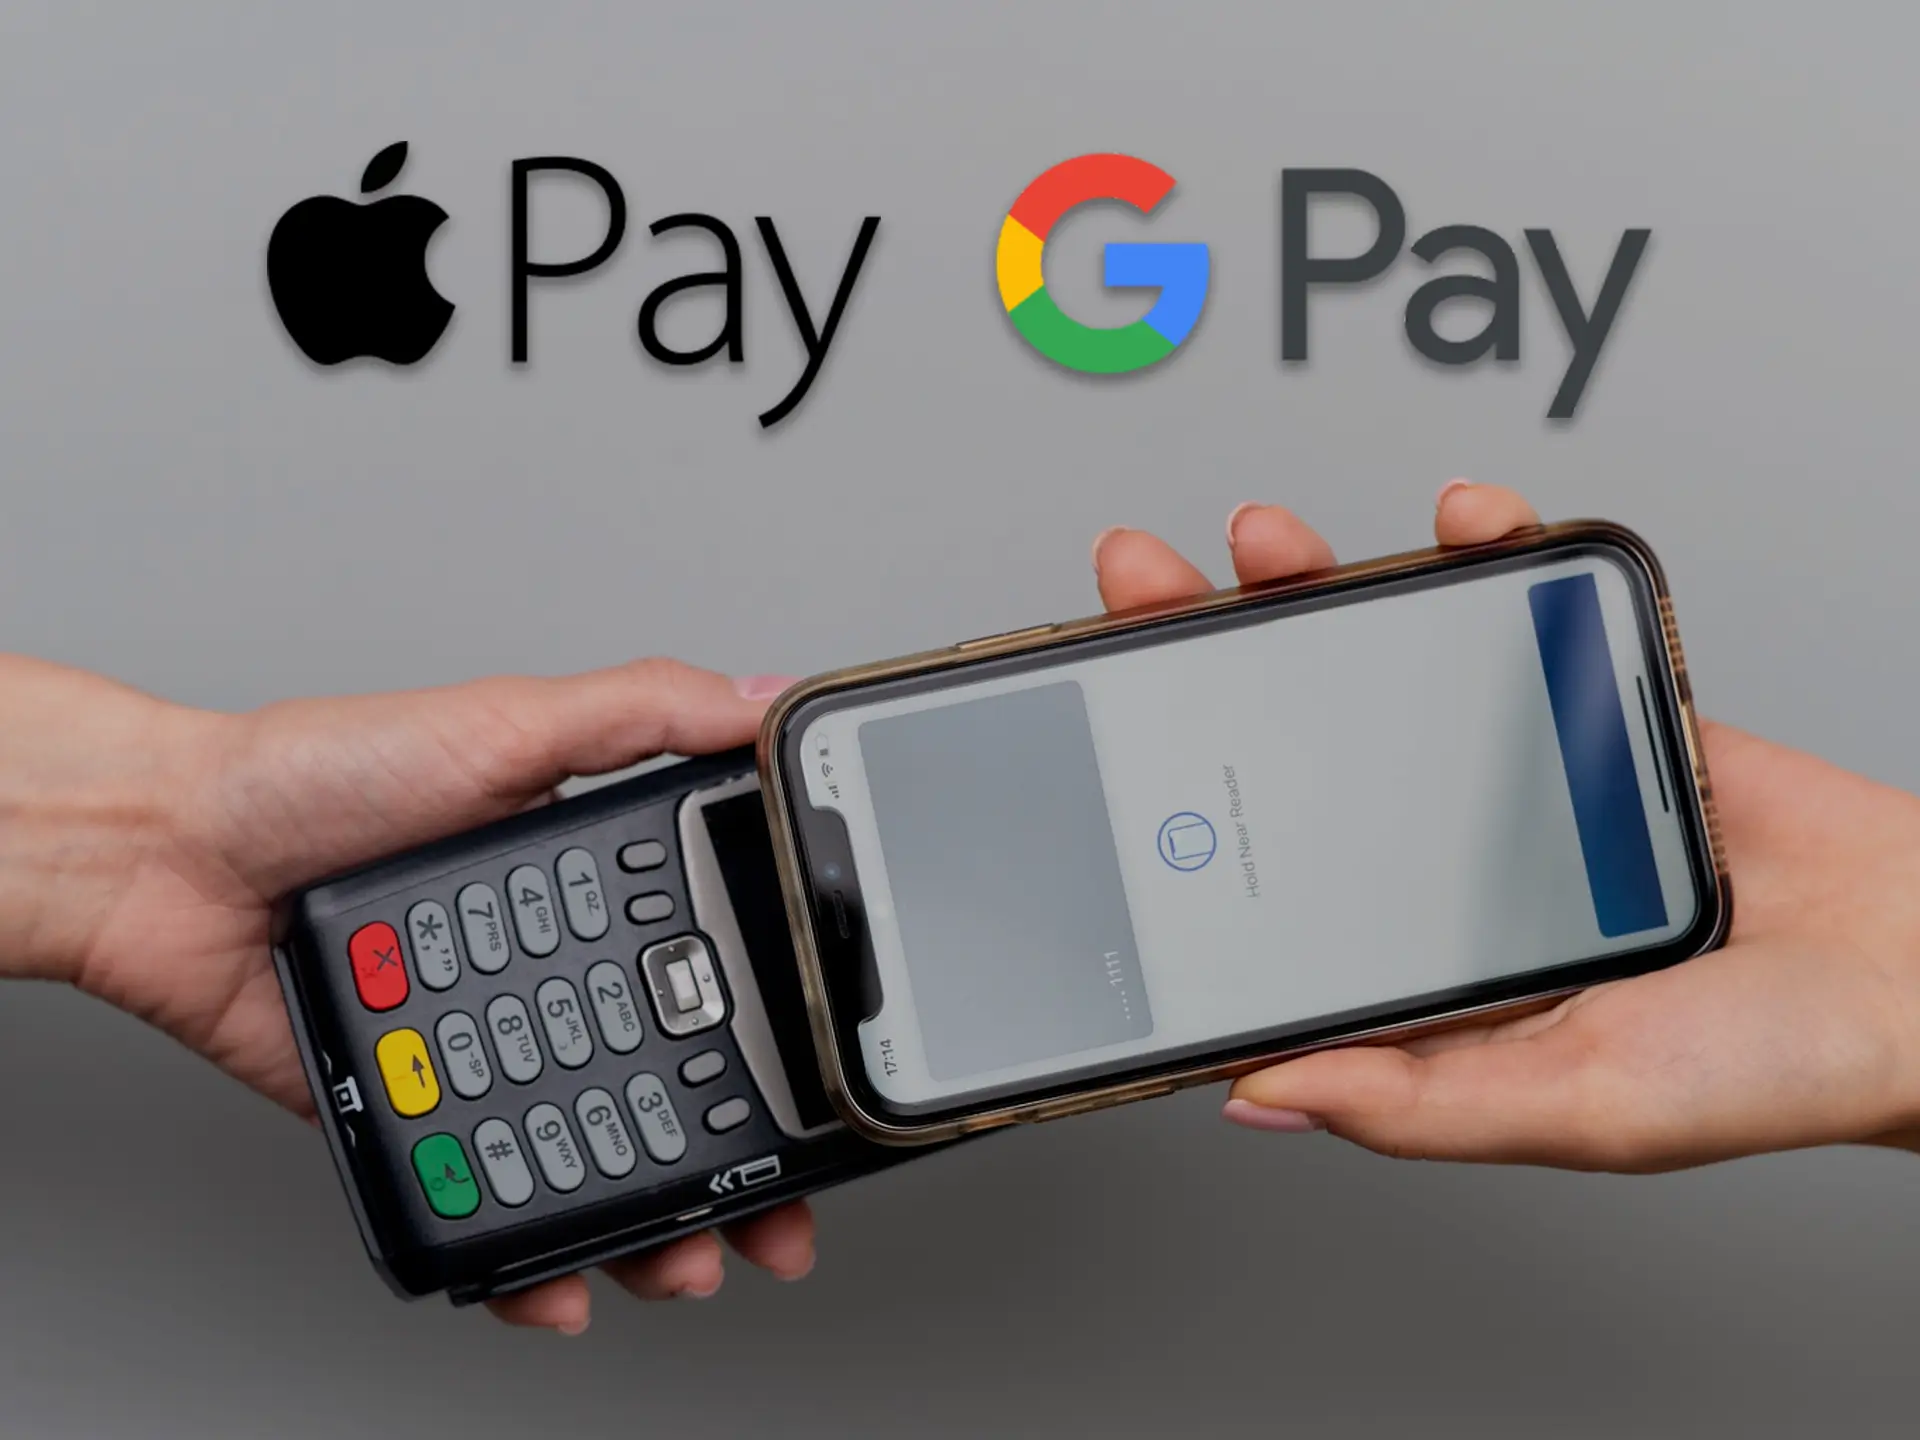 Use Apple and Google Pay to make a quick deposit.